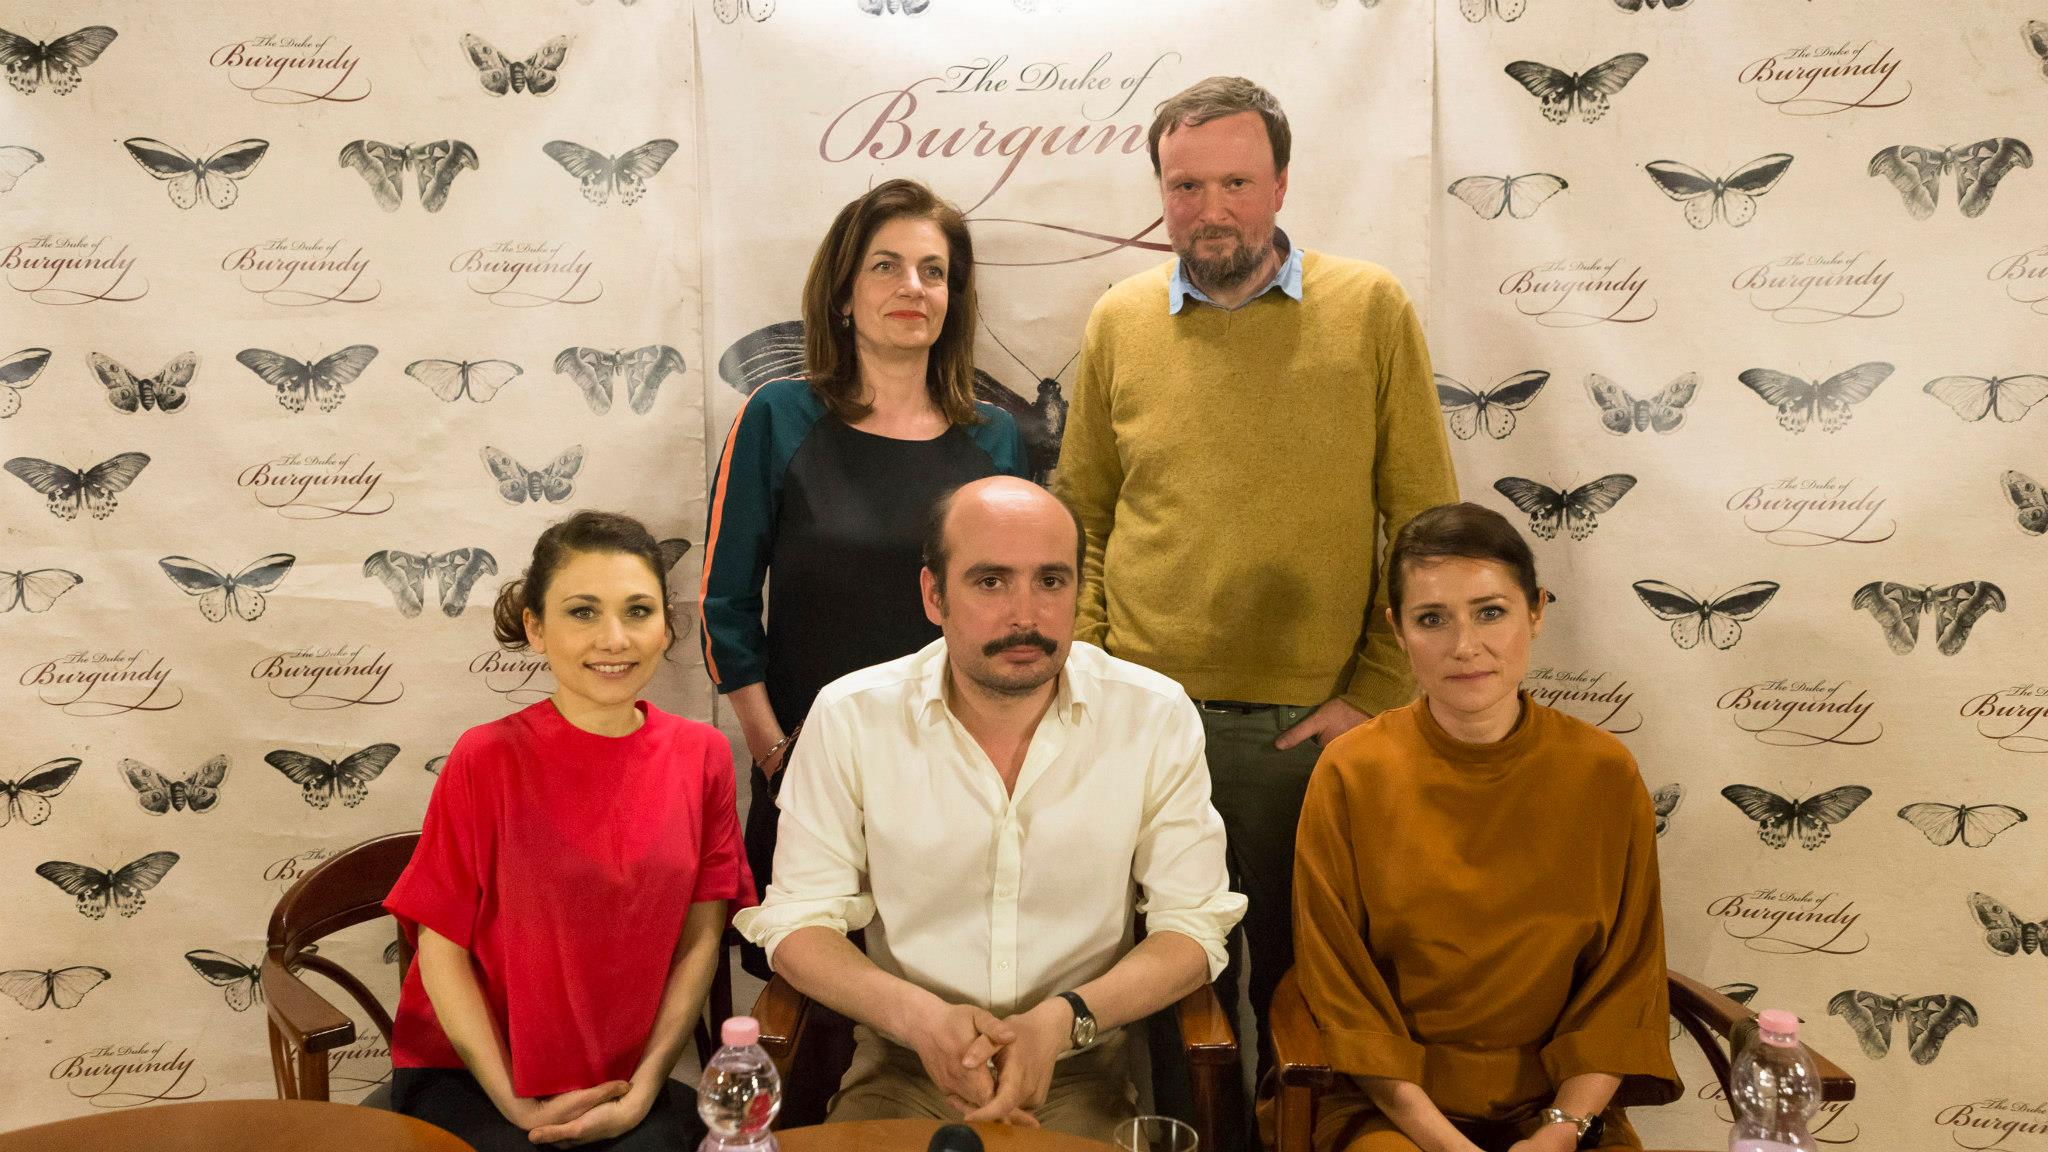 Ildikó Kemény, Andy Starke, Chiara D'Anna, Peter Strickland and Sidse Babett Knudsen at The Duke of Burgundy Hungarian Premiere in Budapest -Titanic Film Festival, April 2015. Press Conference.